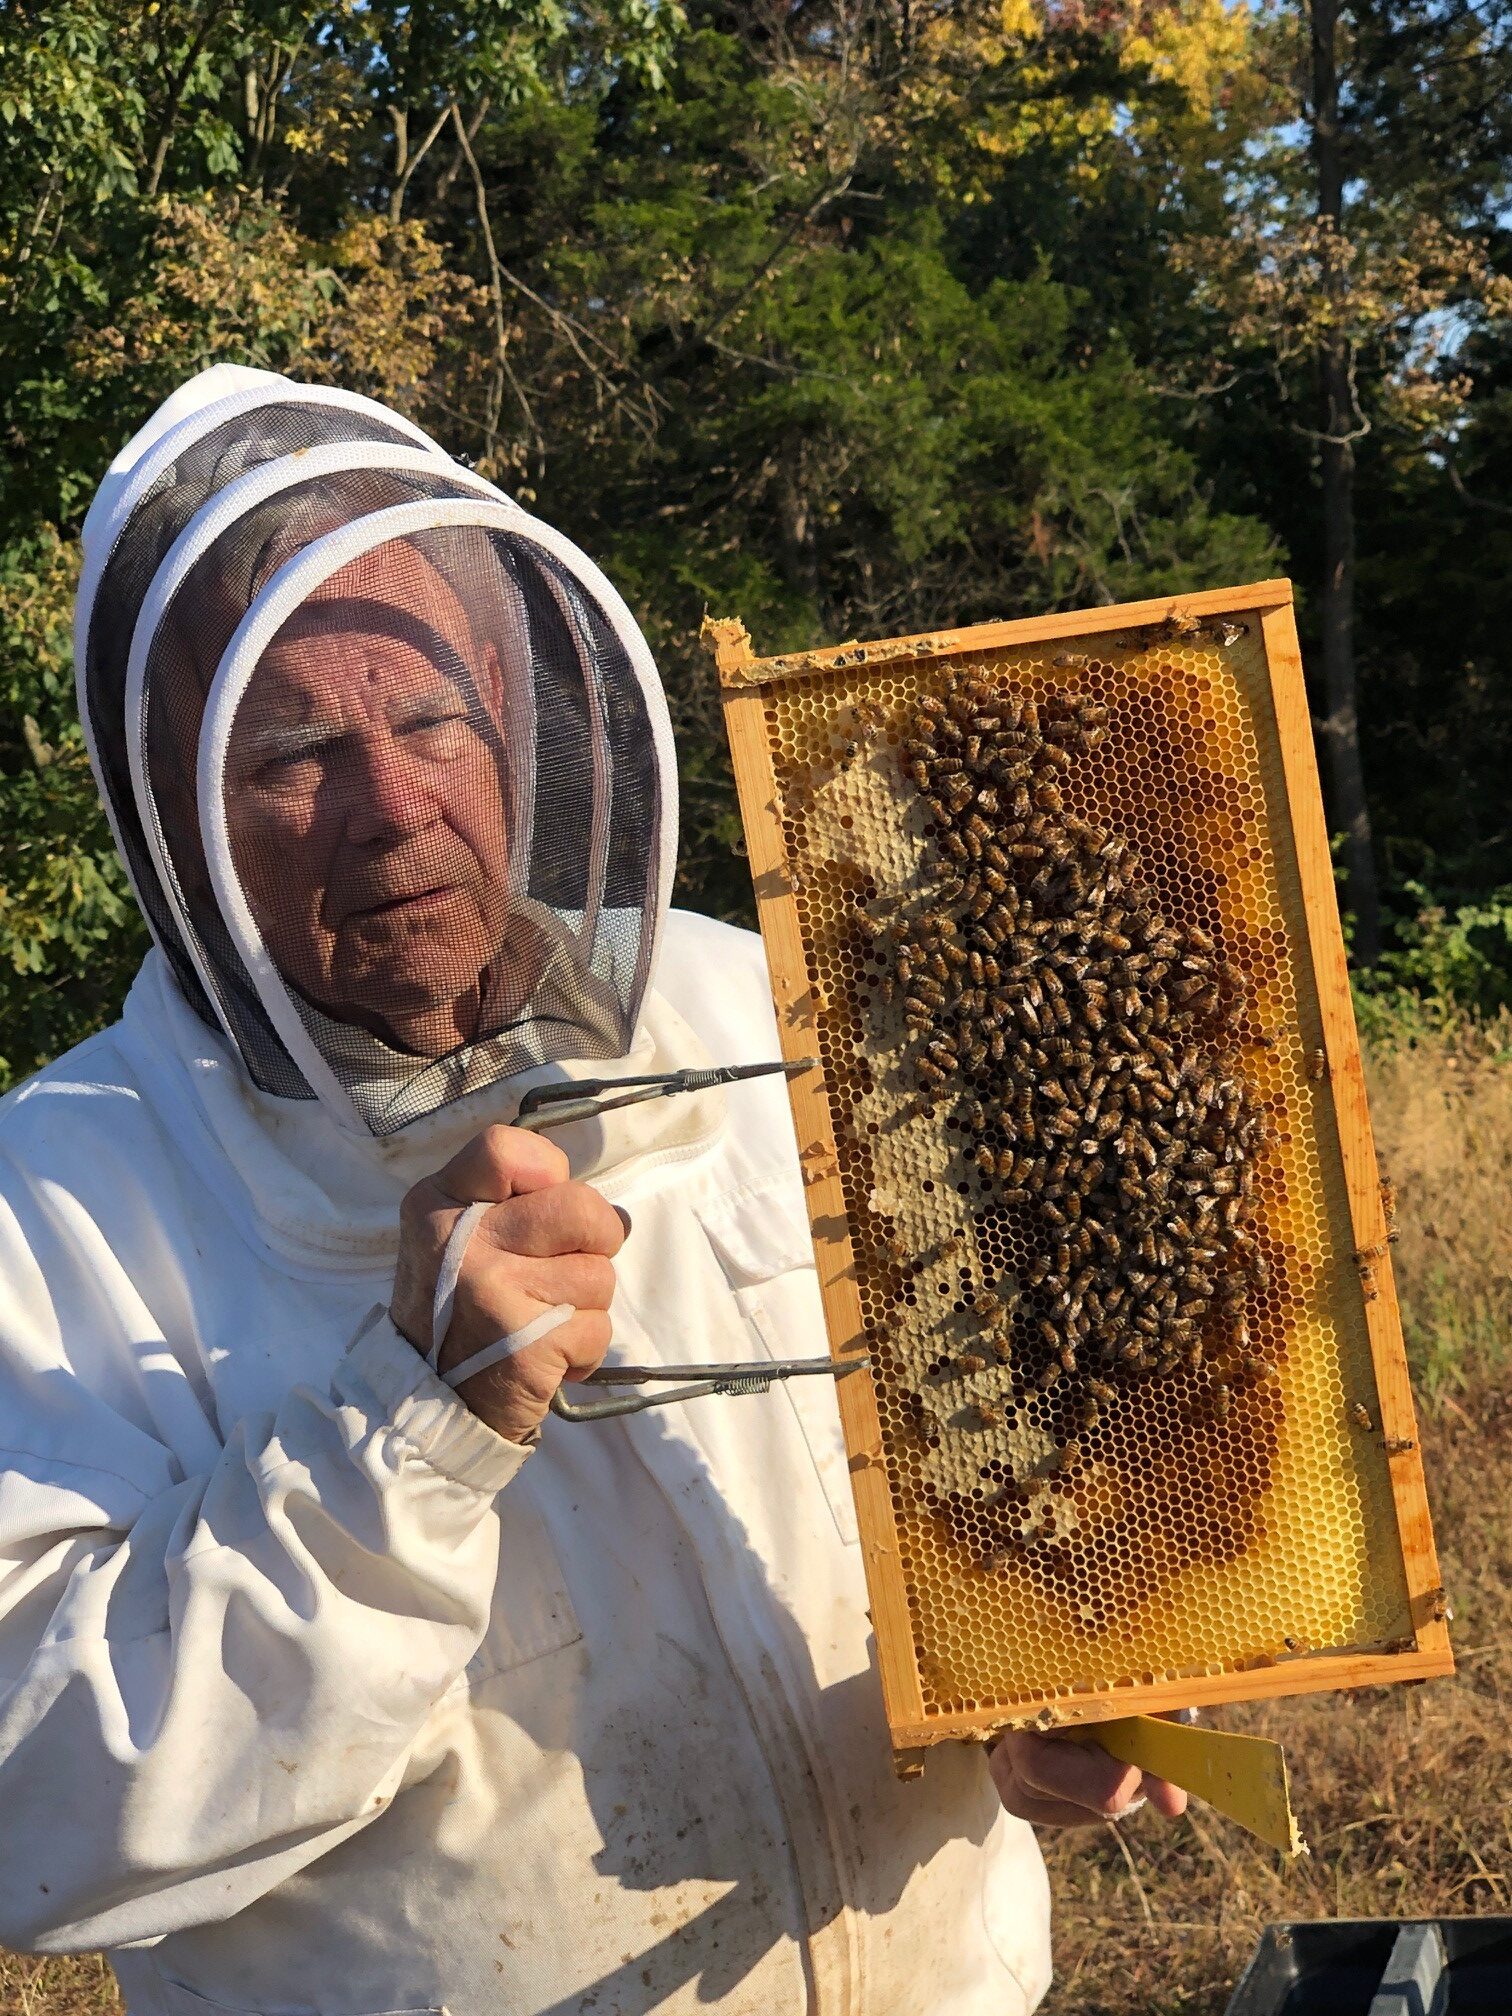 Beekeeper holding a honeycomb panel with bees on it